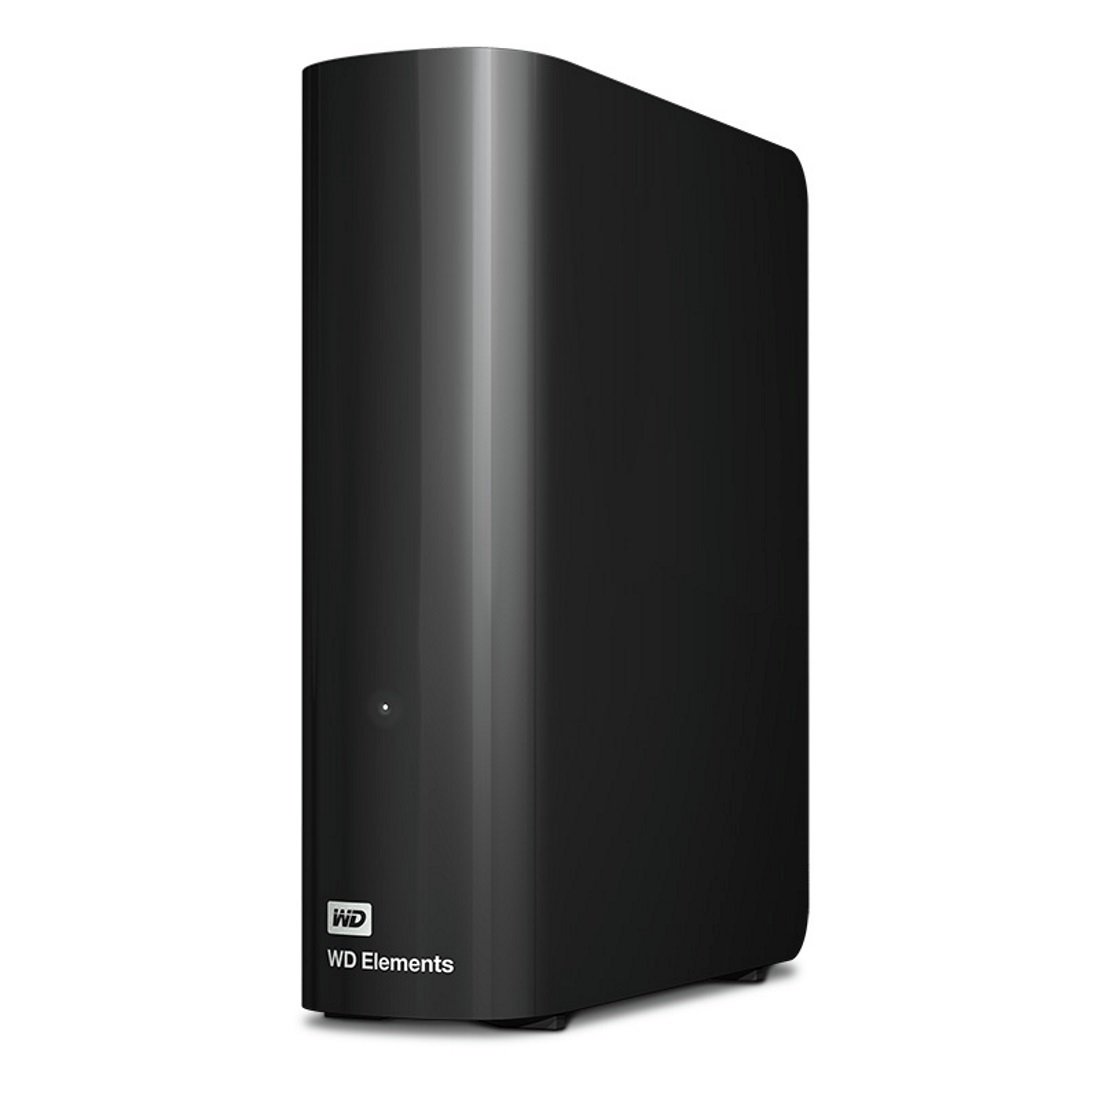 WD Elements 4TB Elements Hard Drive Review